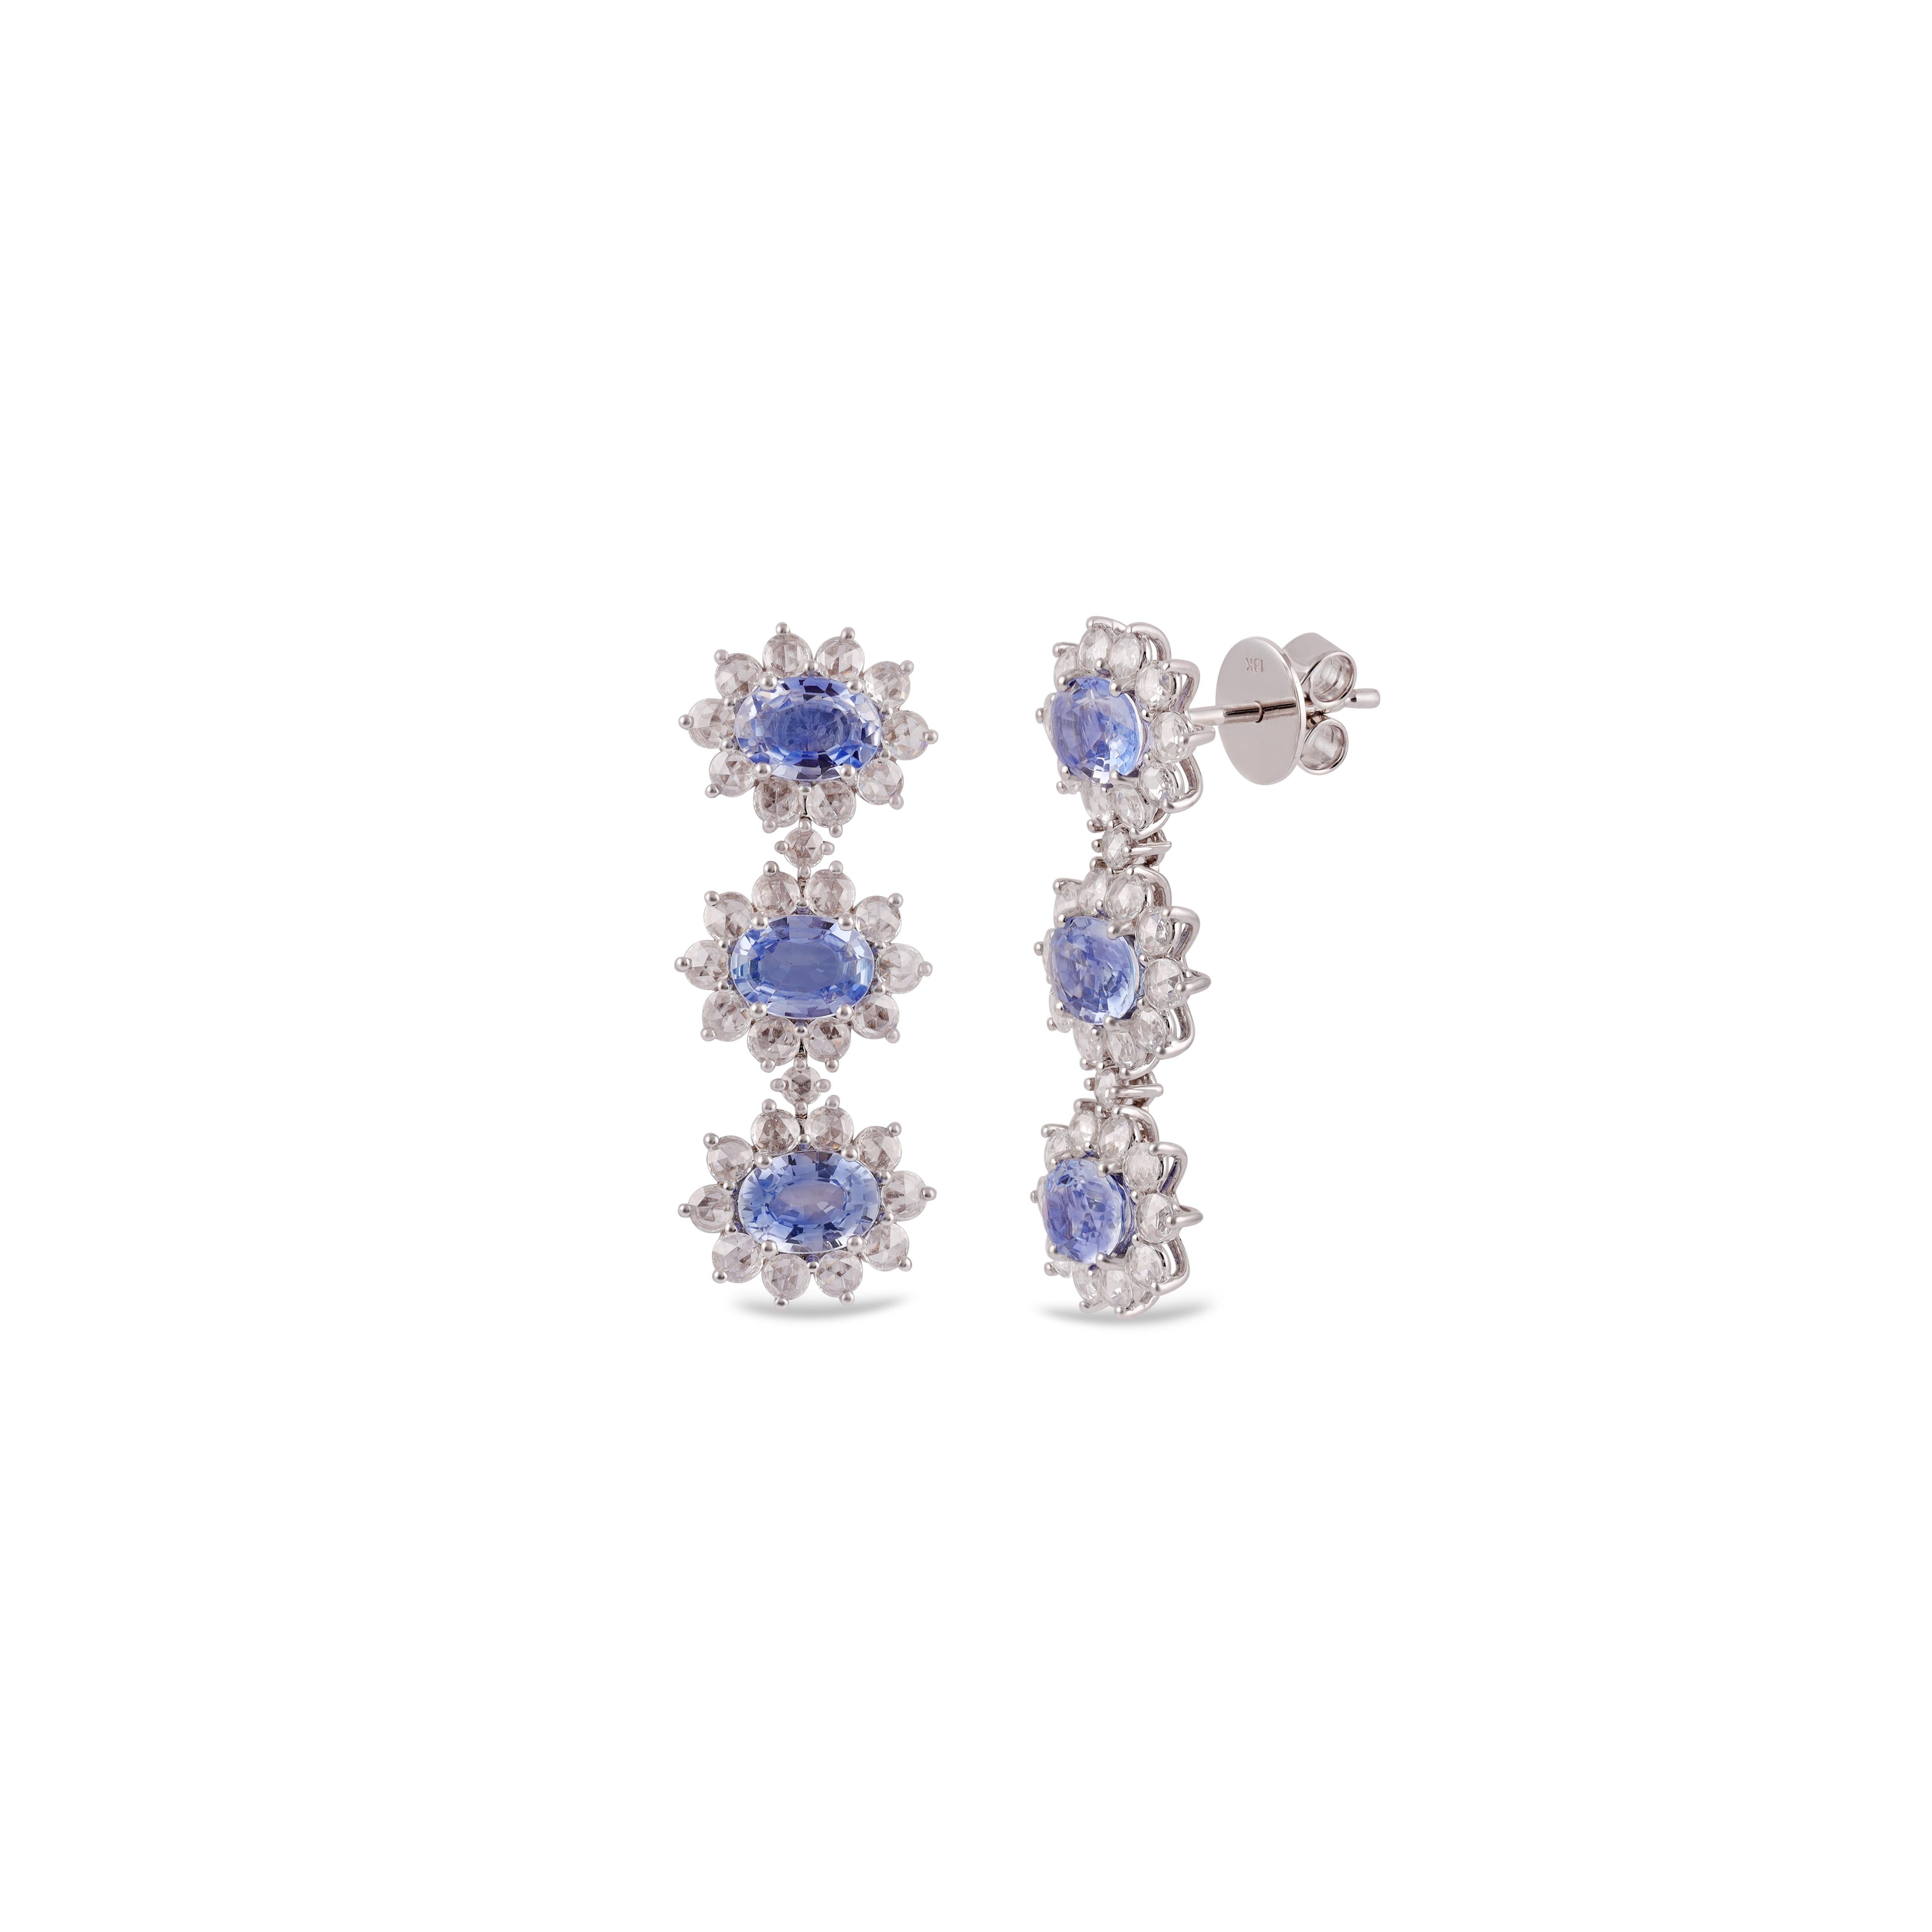 Contemporary Blue Sapphire and Diamond Earring Studded in 18 Karat White Gold